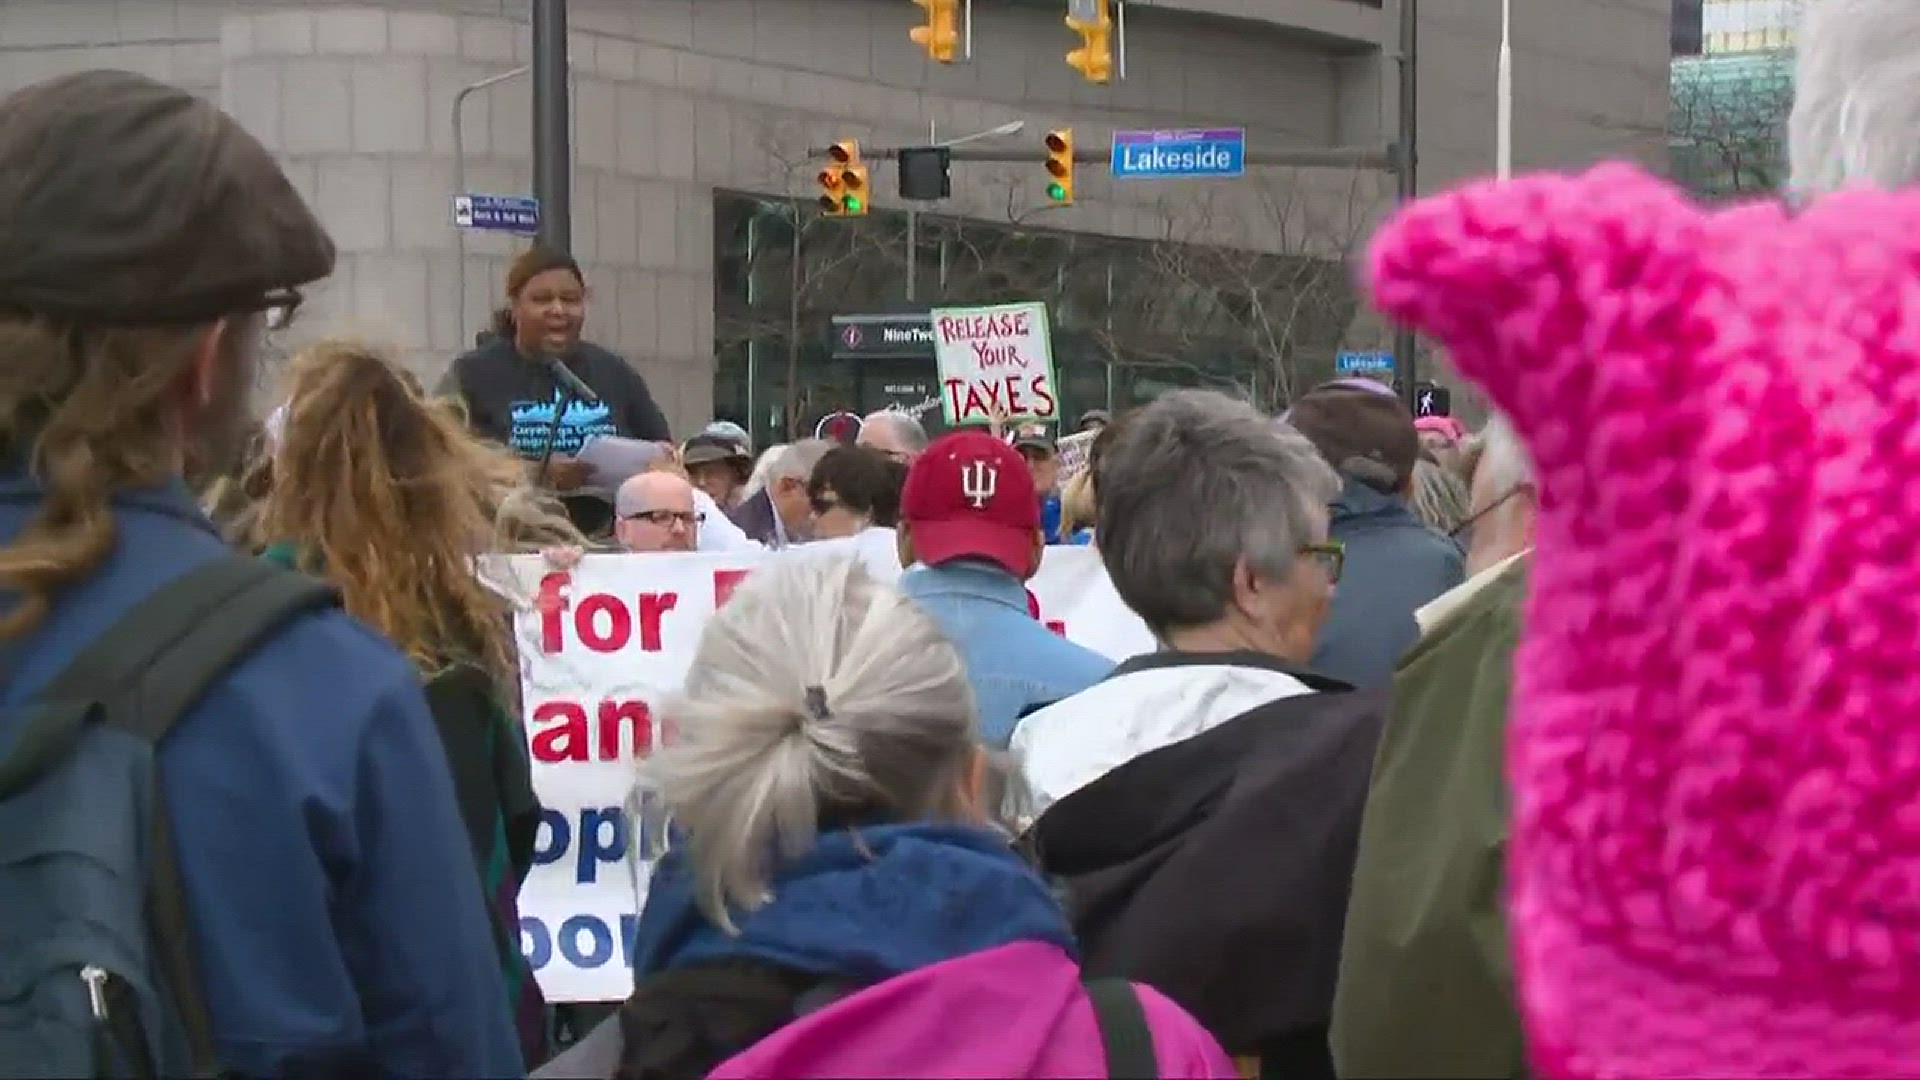 Protestors gathered in Cleveland on Saturday to urge President Donald Trump to release his tax information.